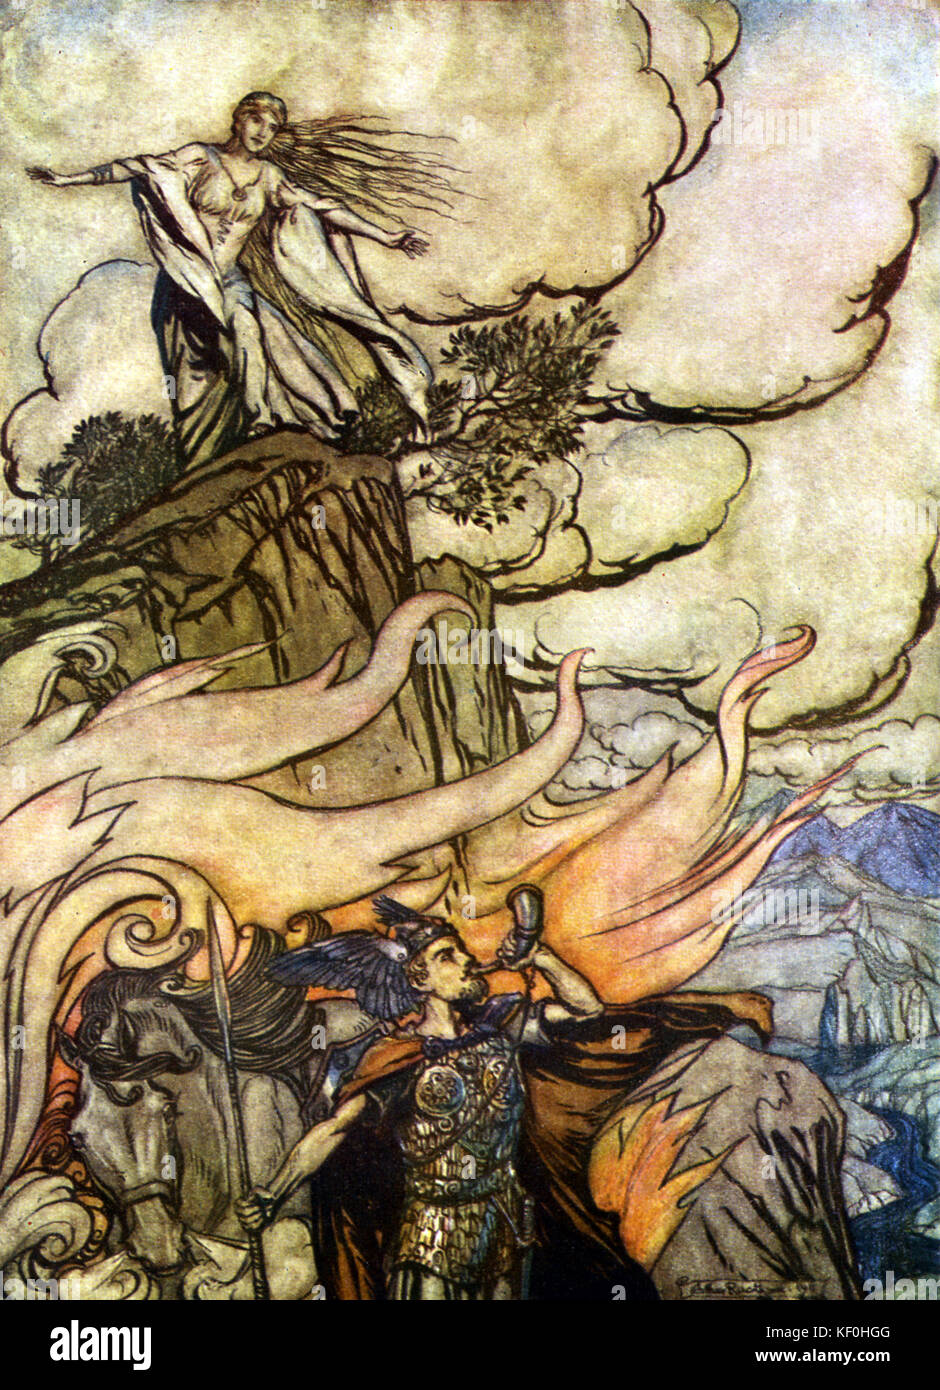 The Twilight of the Gods / Göttterdämmerung by Richard Wagner. Siegfried departs in search of adventure having given Brünnhilde the Ring.  Illustration by Arthur Rackham 1867 - 1939.  Caption:  'Siegfried leaves Brünnhilde in search of adventure' Prelude.  From 'The Ring Cycle' / 'Der Ring des Nibelungen'.  RW German composer & author, 22 May 1813 - 13 February 1883. Stock Photo